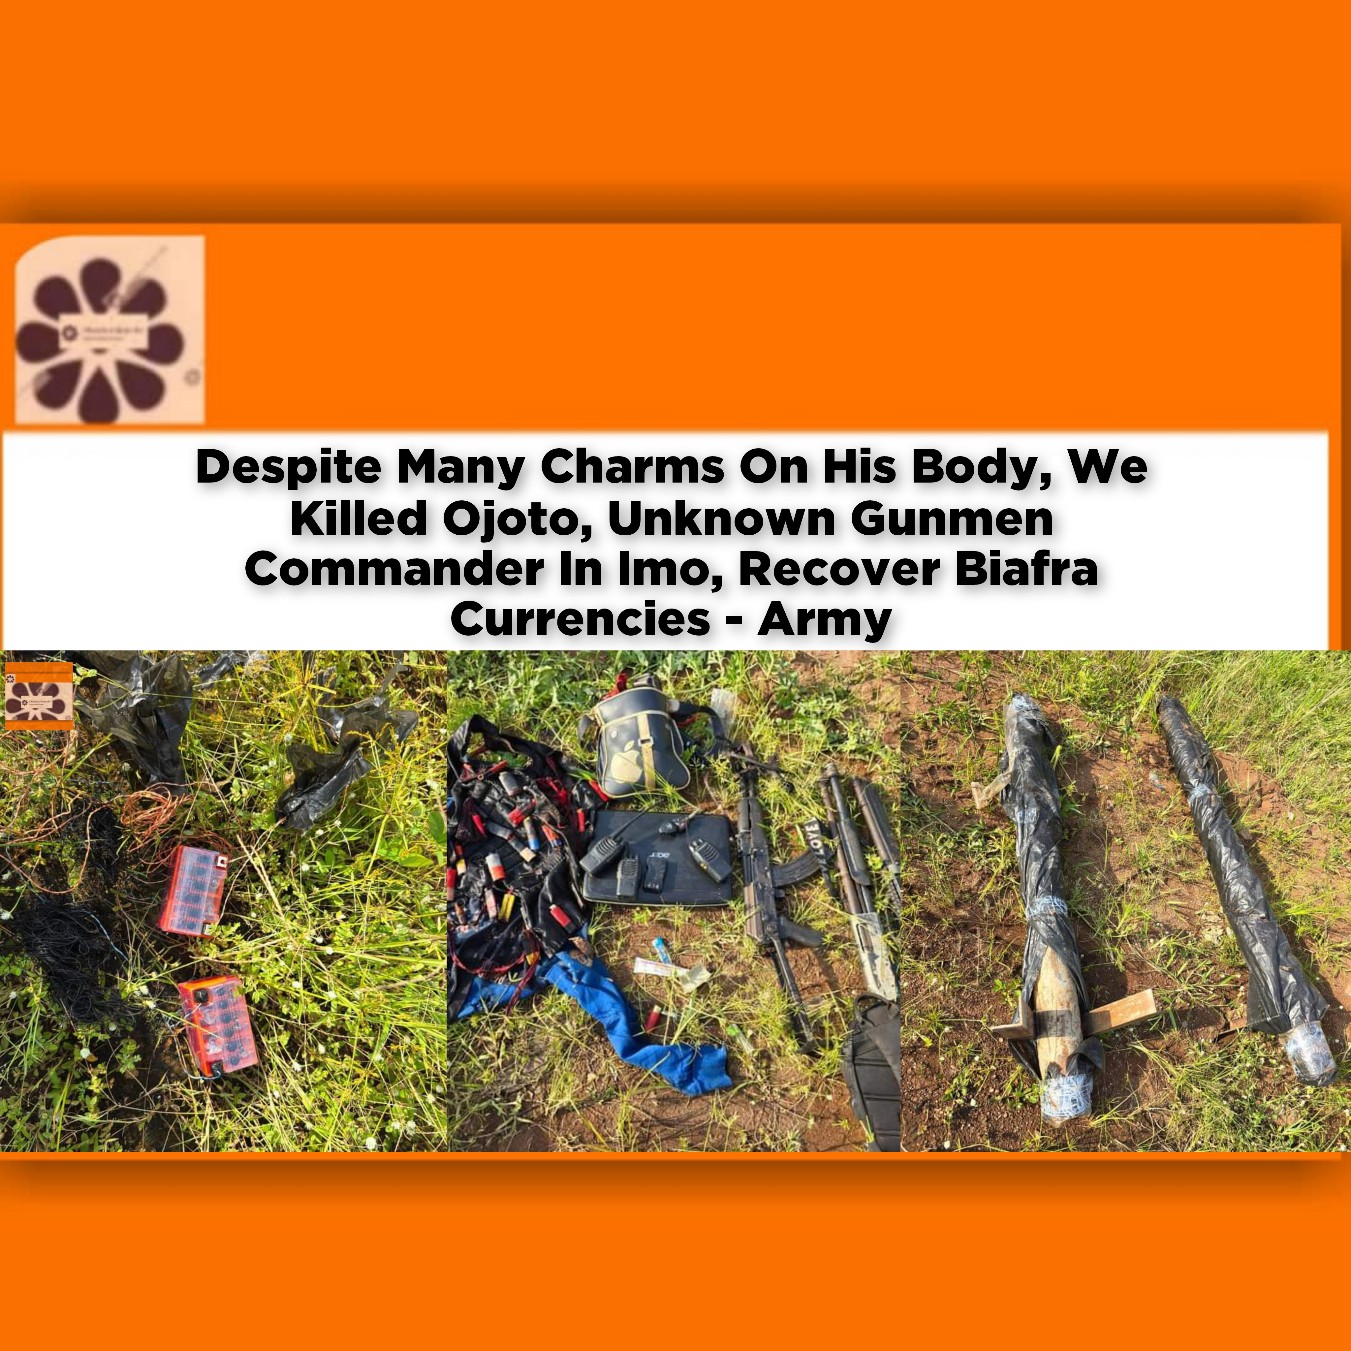 Despite Many Charms On His Body, We Killed Ojoto, Unknown Gunmen Commander In Imo, Recover Biafra Currencies - Army ~ OsazuwaAkonedo #Redesign